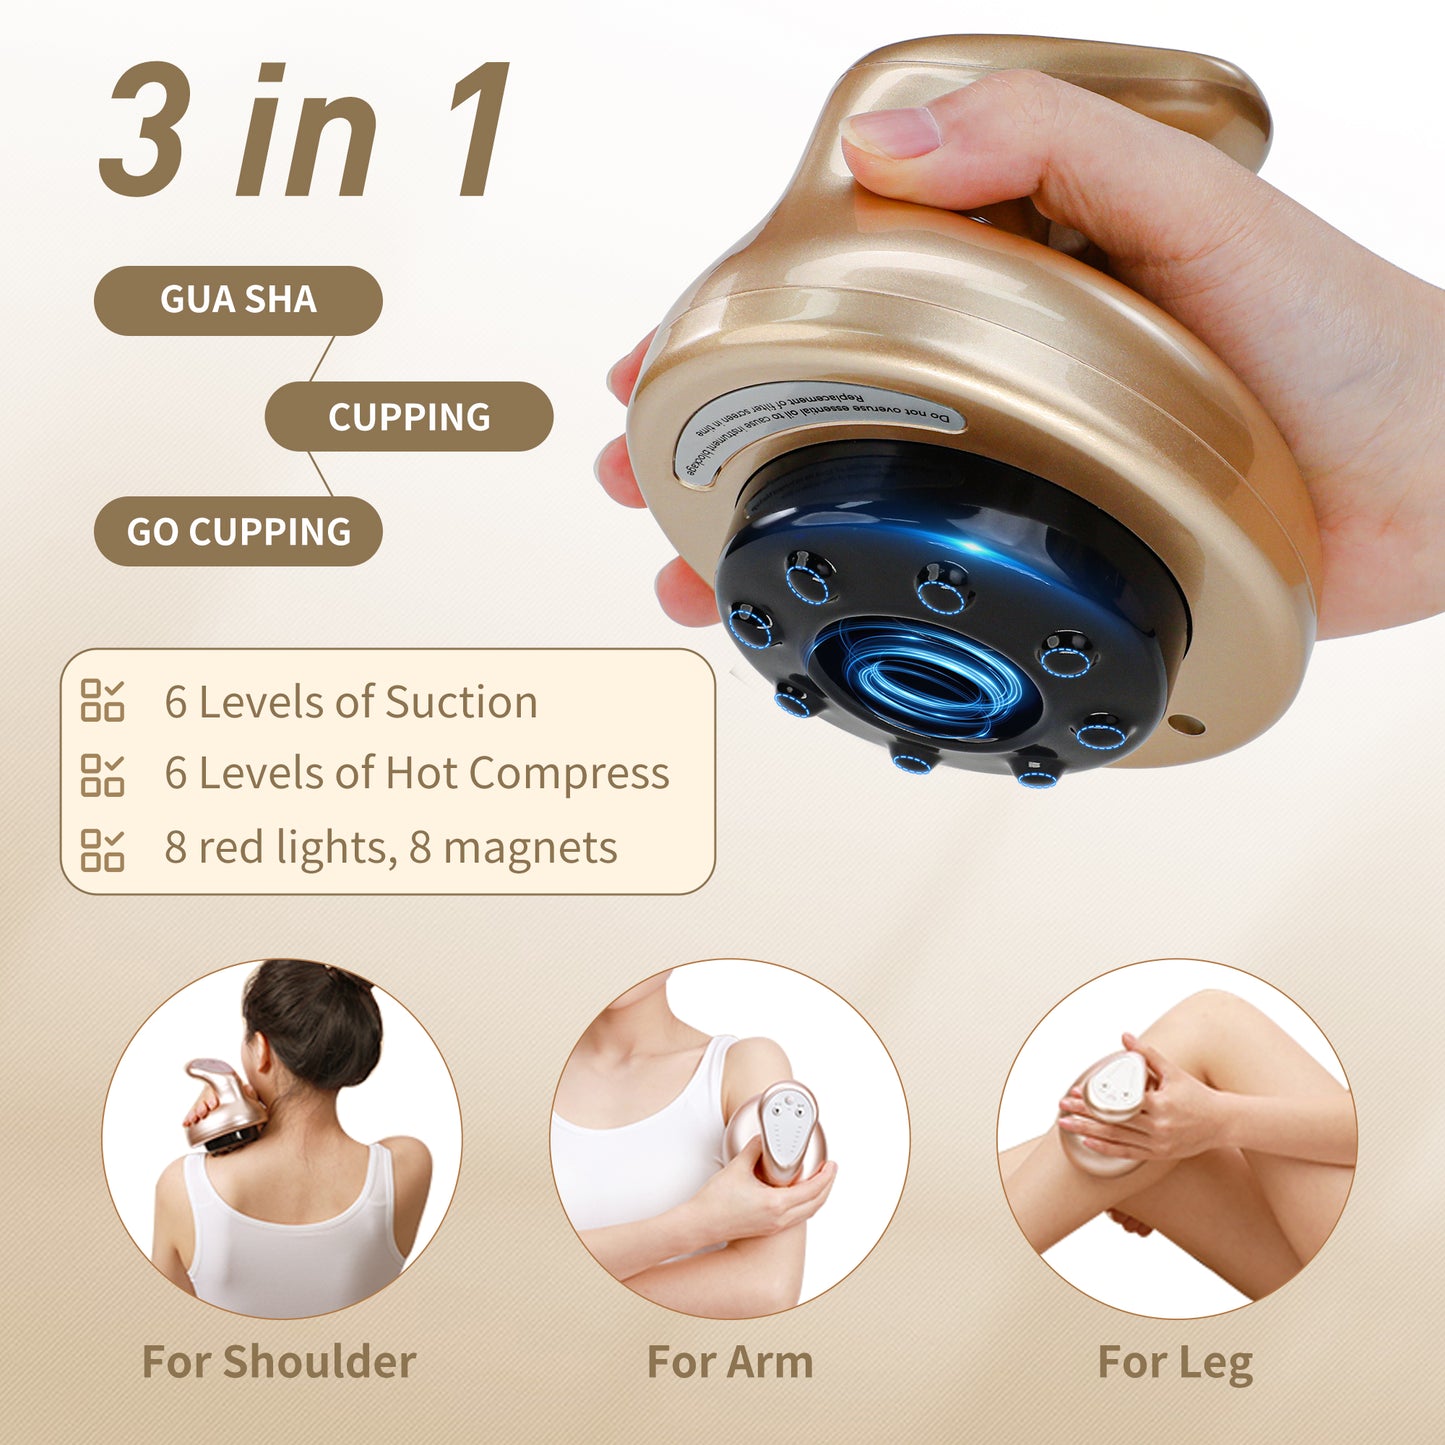 KEKOY Electric Cupping Therapy Set